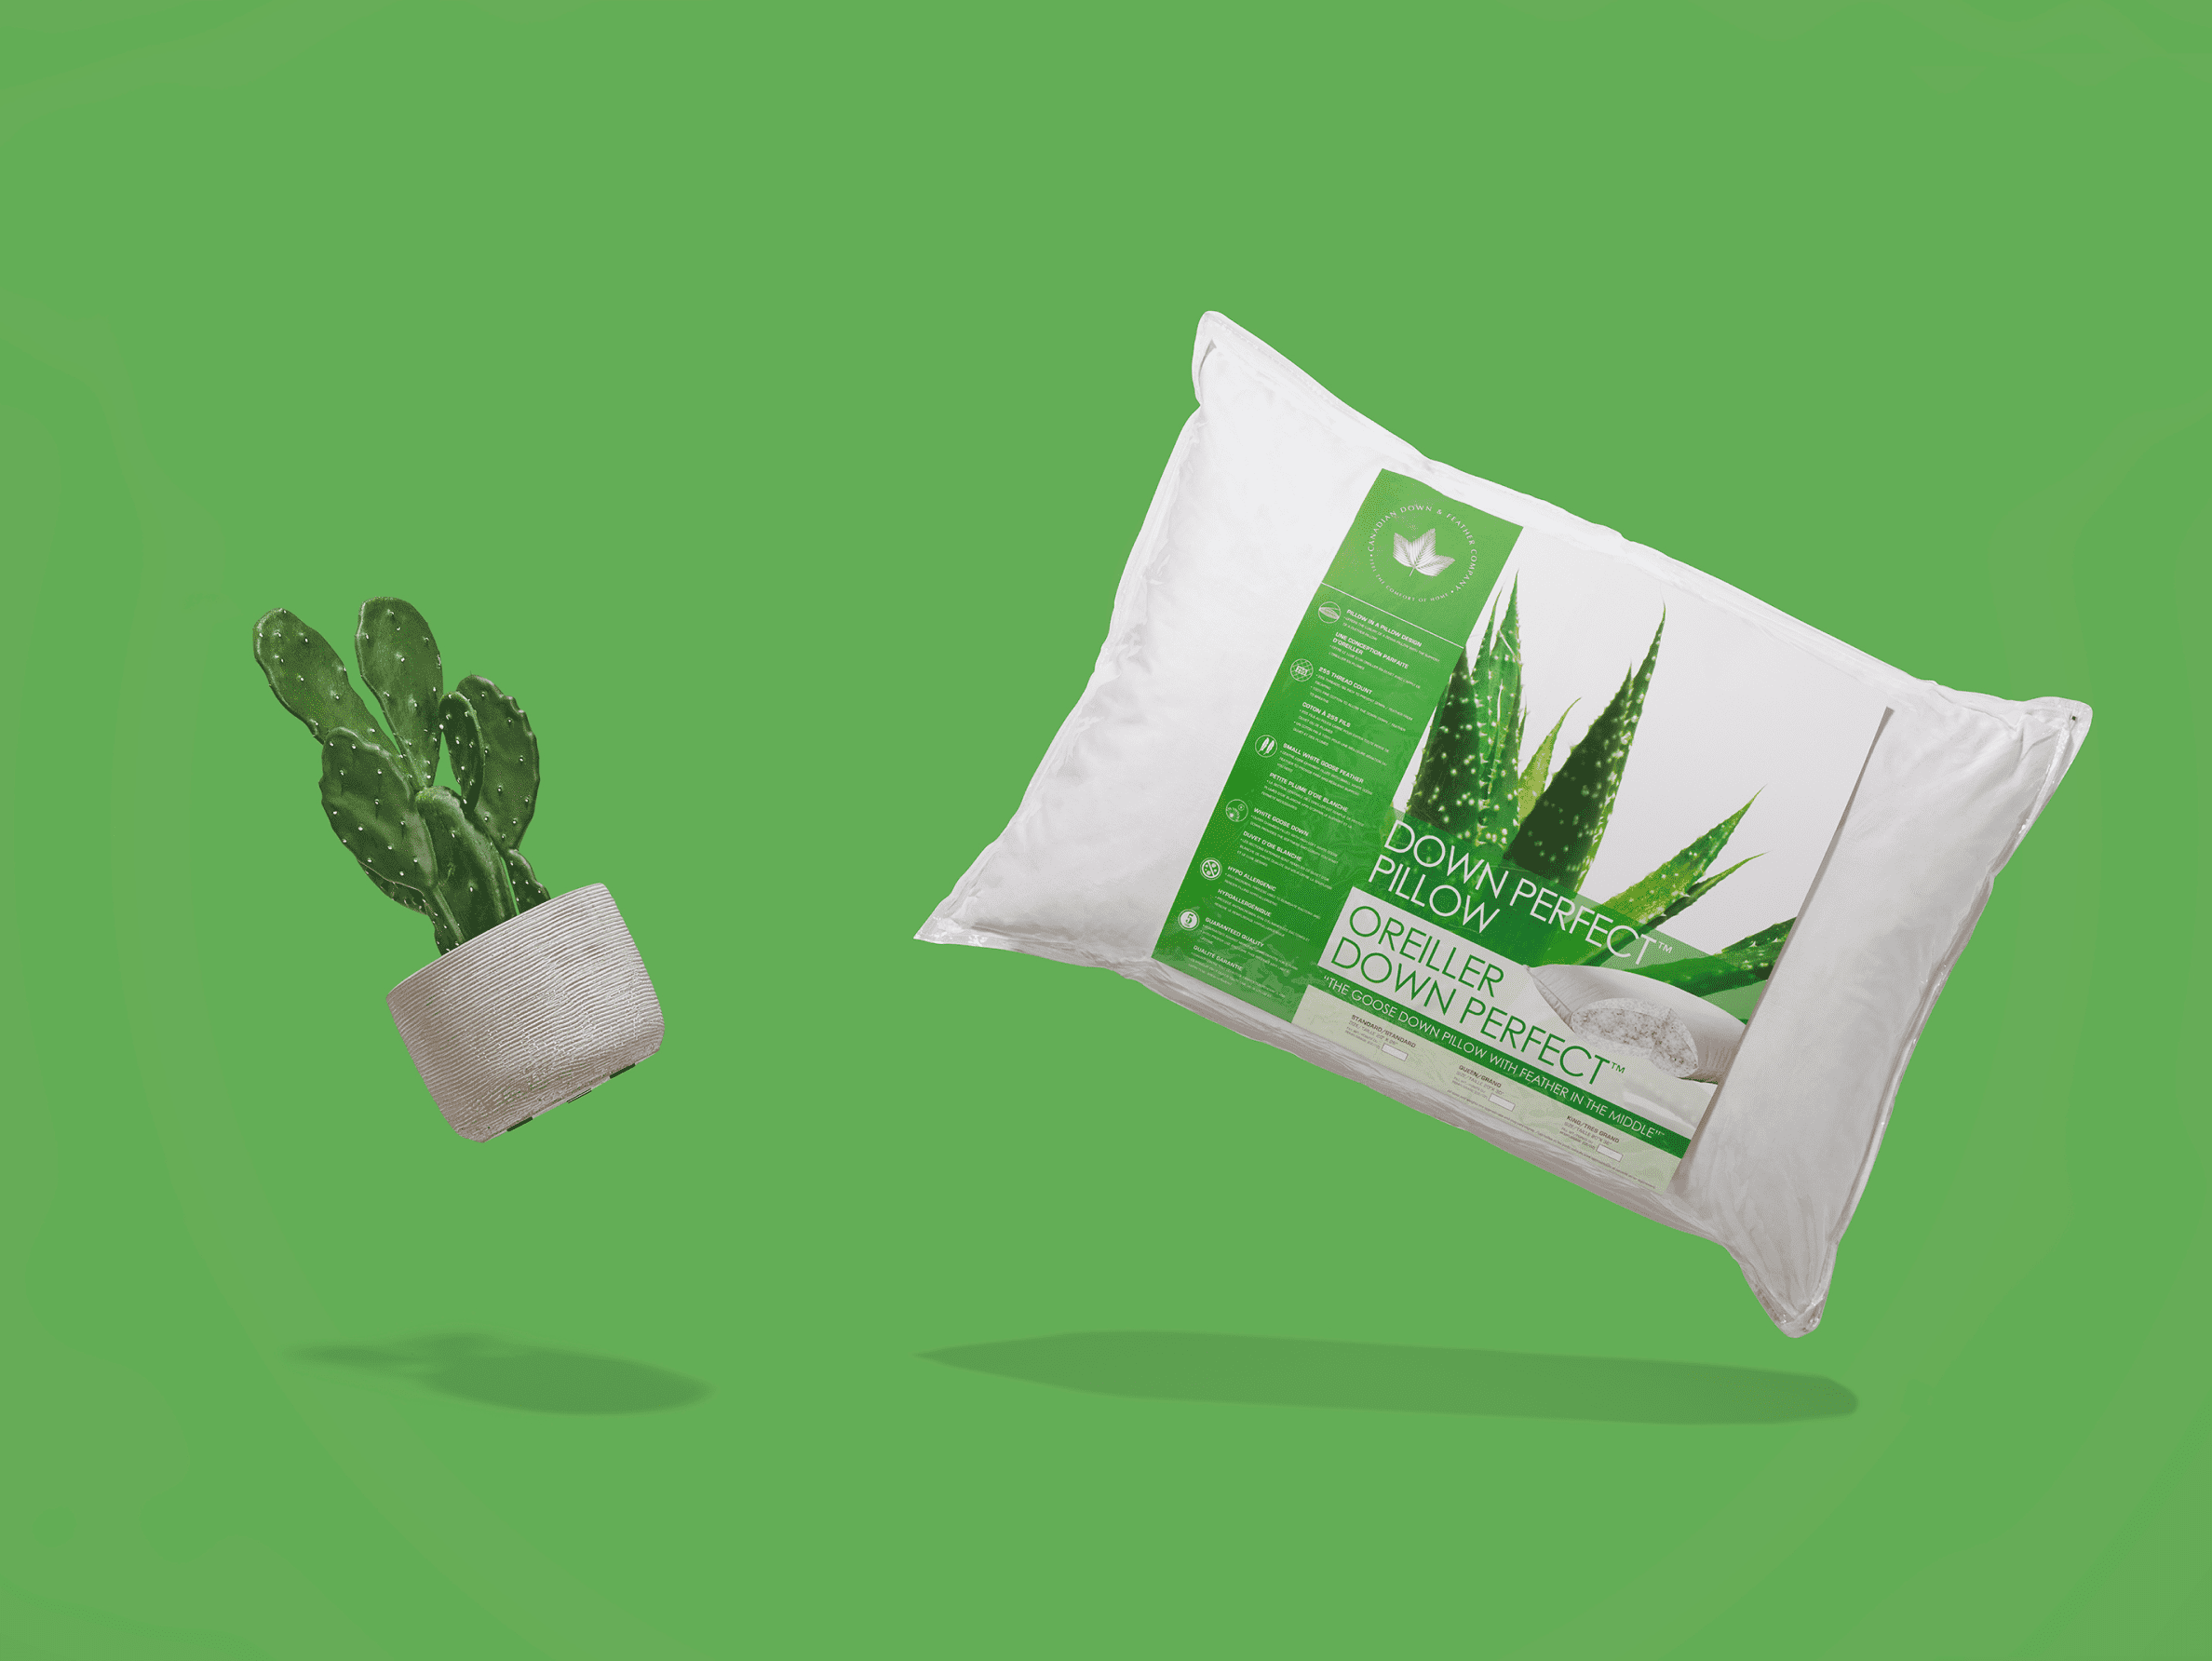 A “down perfect pillow” from Canadian Down and Feather on a green background, next to a green cactus.